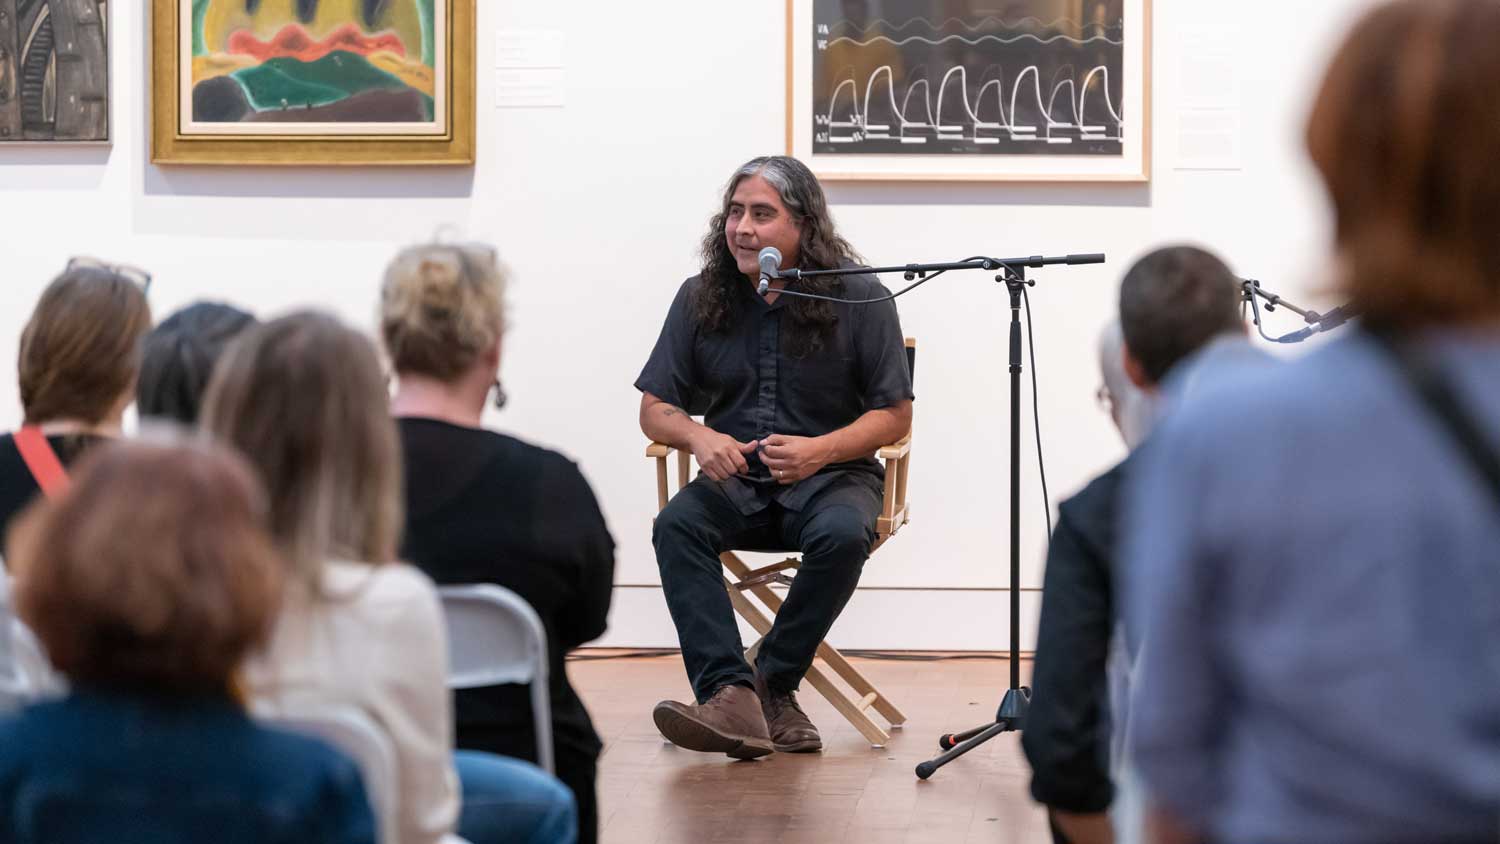 Person seated behind a microphone in an art gallery facing the camera and speaking to a seated audience